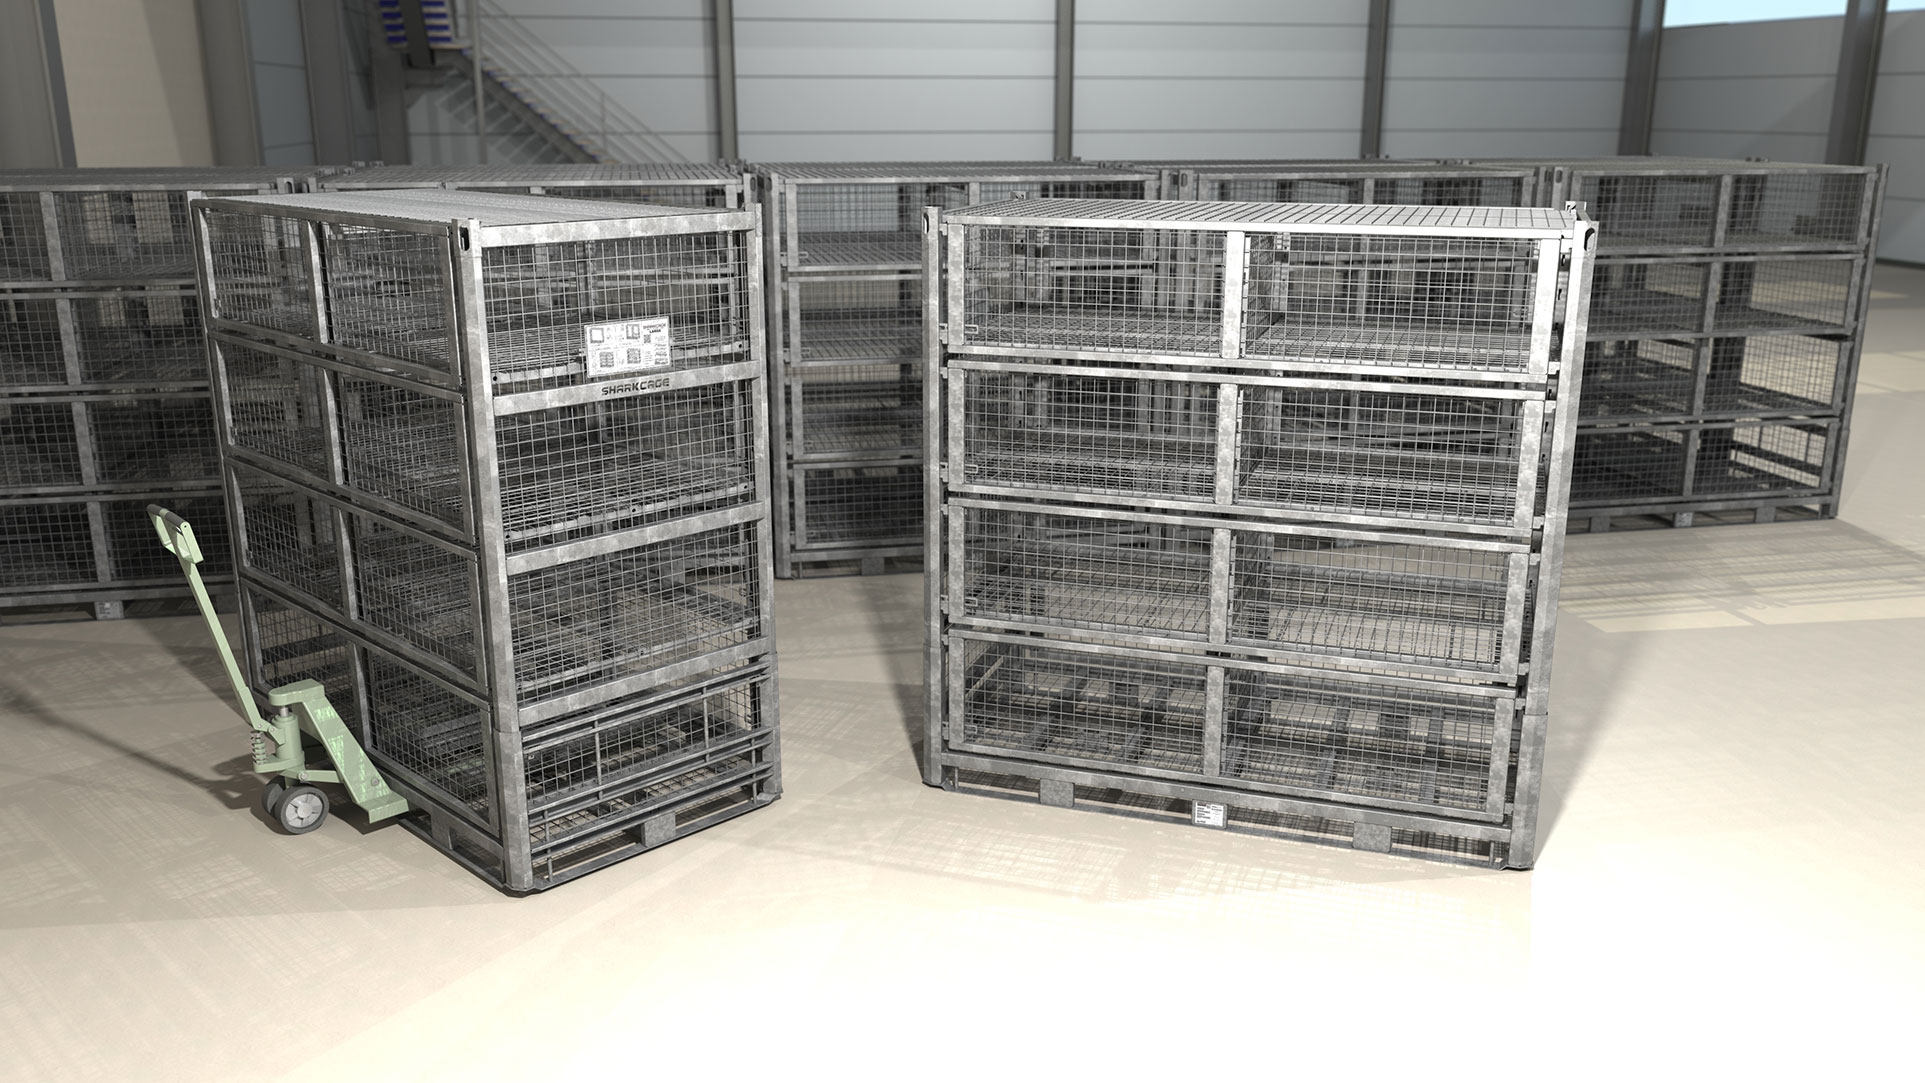 Deployable Military Containers in Garrison Storage